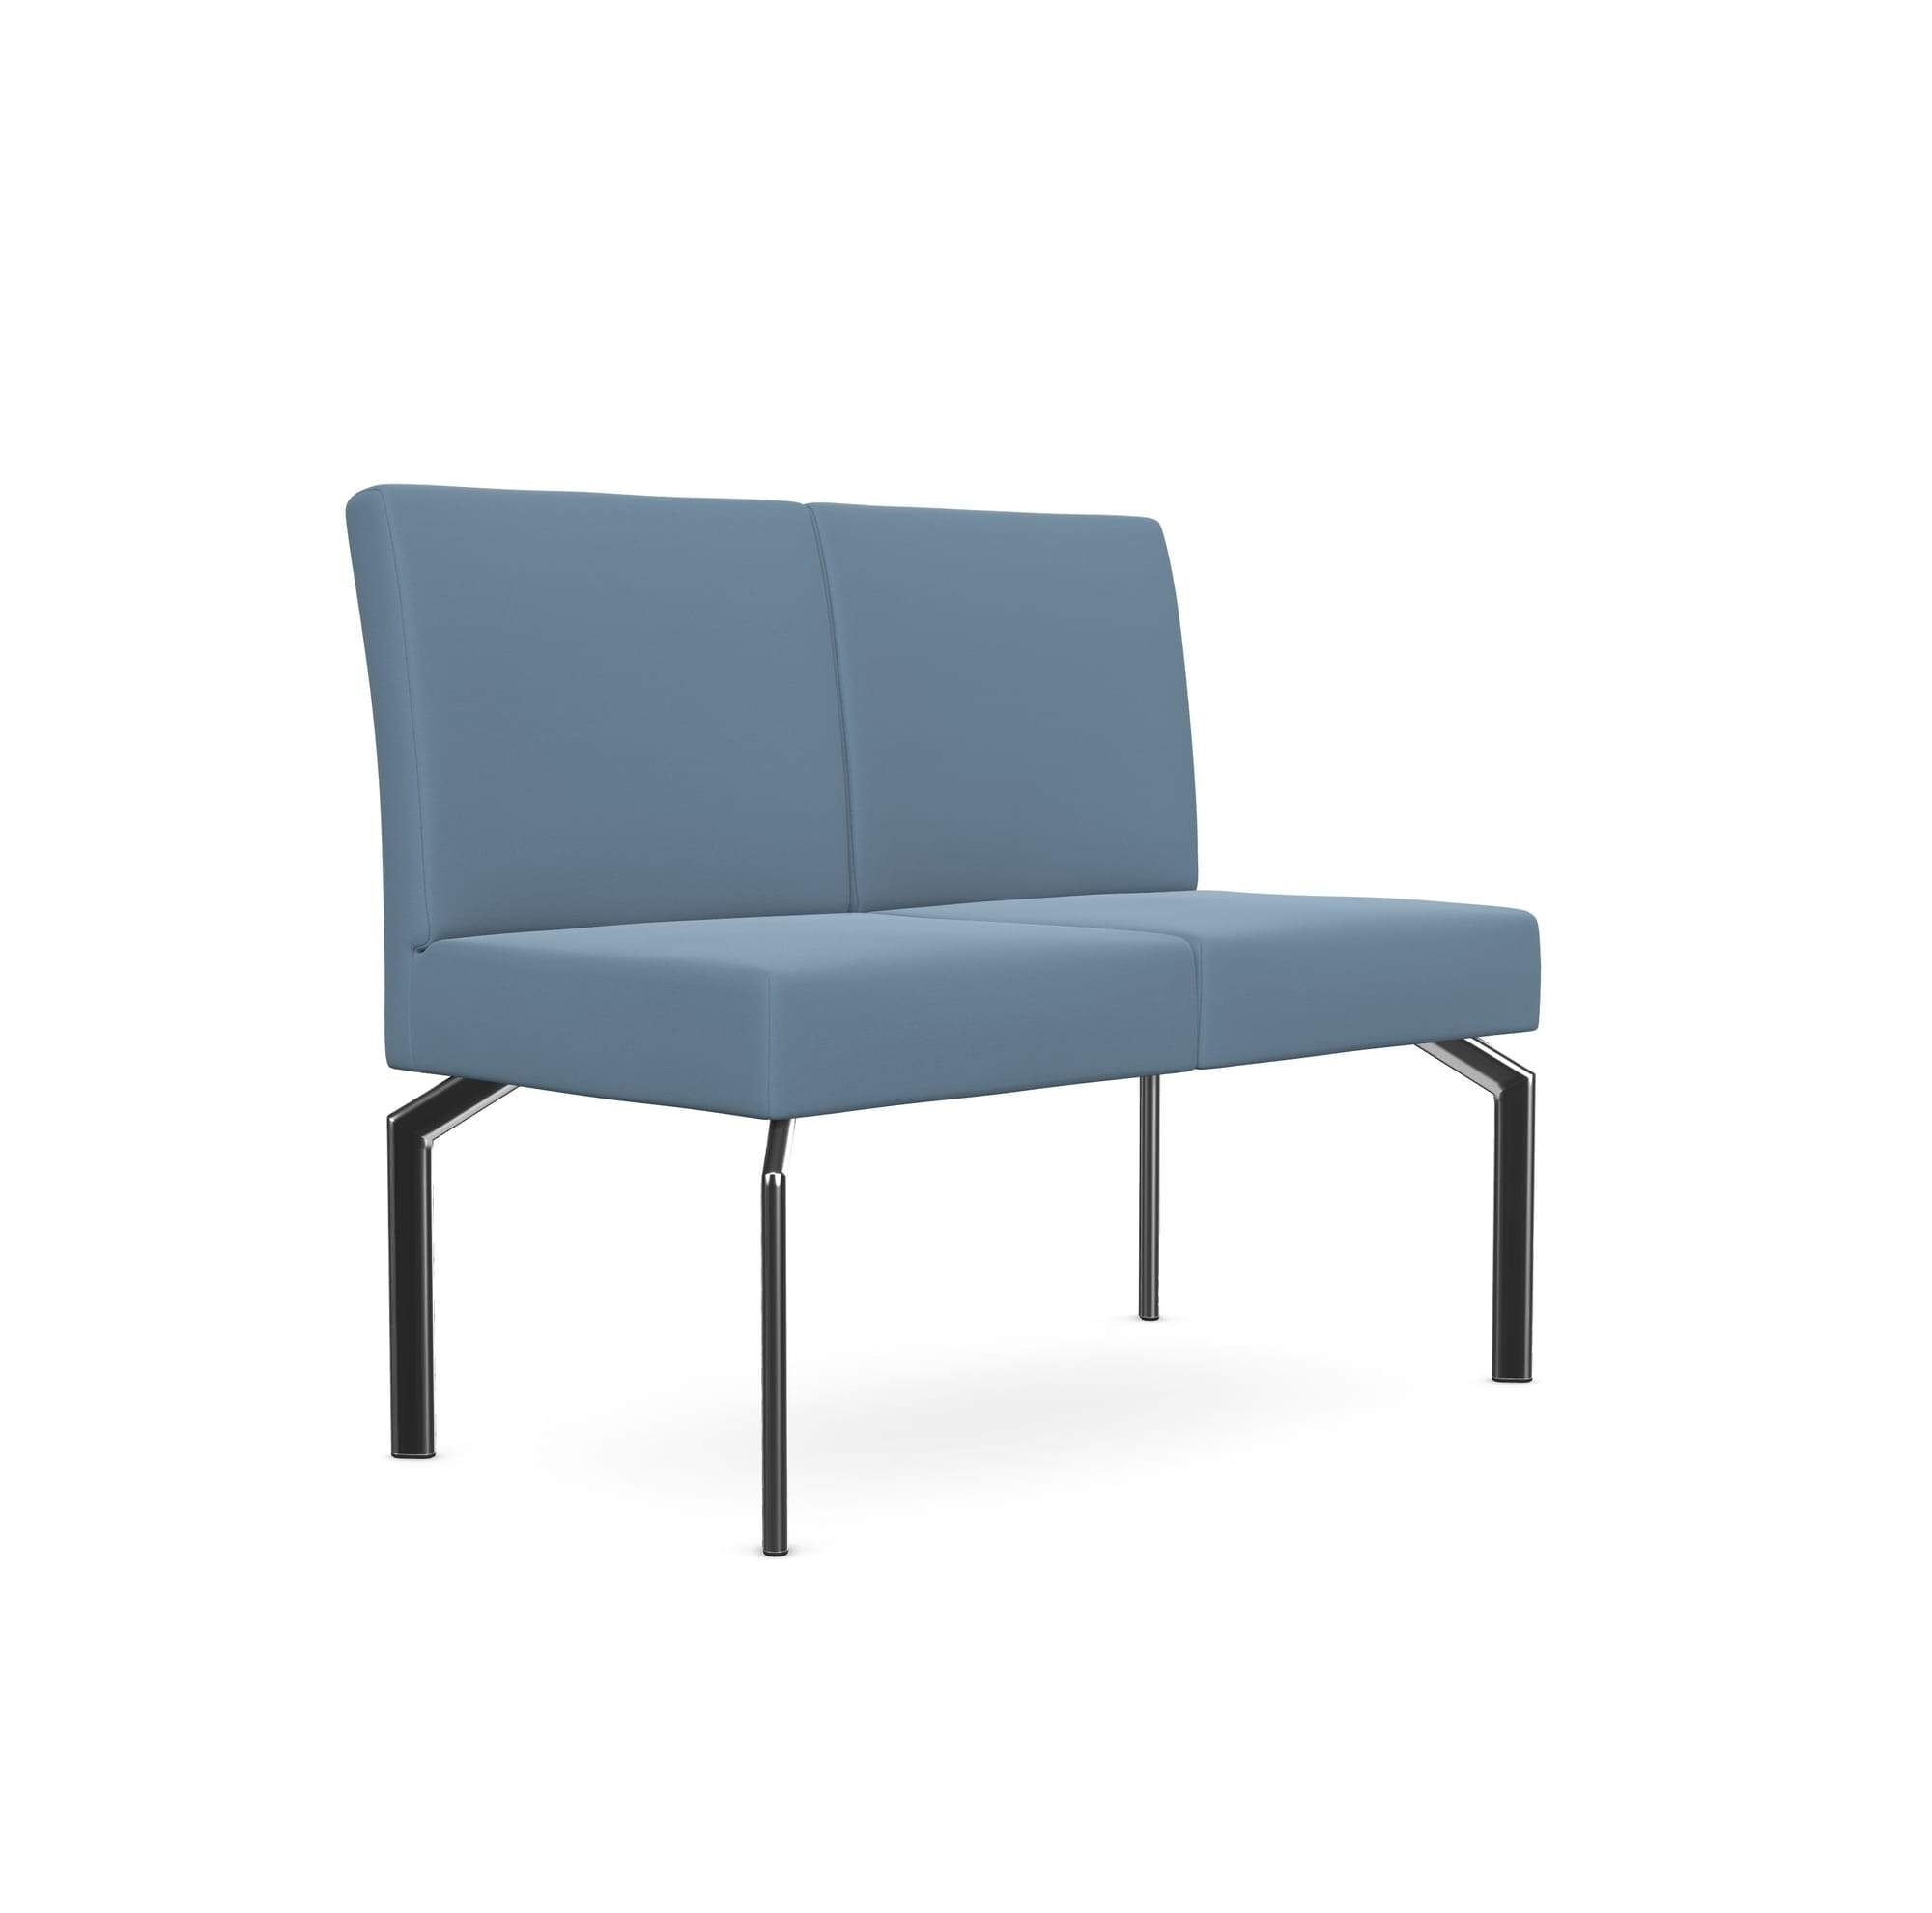 Cloud - 2 Seater with Backrest